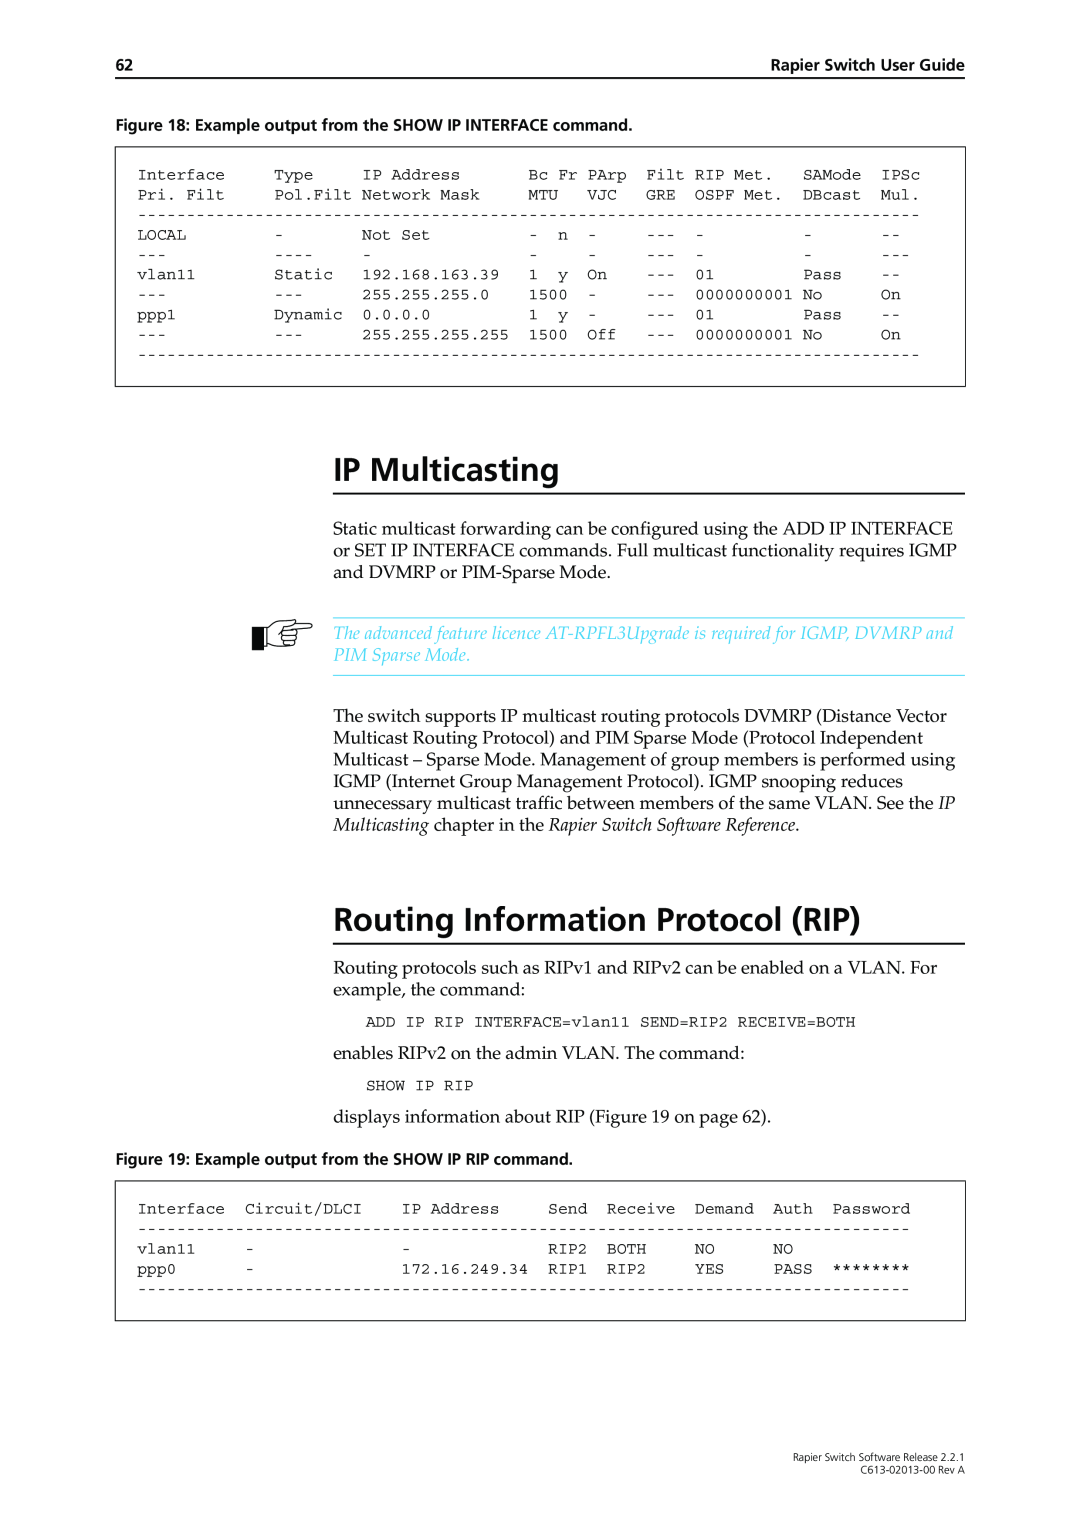 Allied Telesis C613-02013-00 manual IP Multicasting, Routing Information Protocol RIP, PIM Sparse Mode 